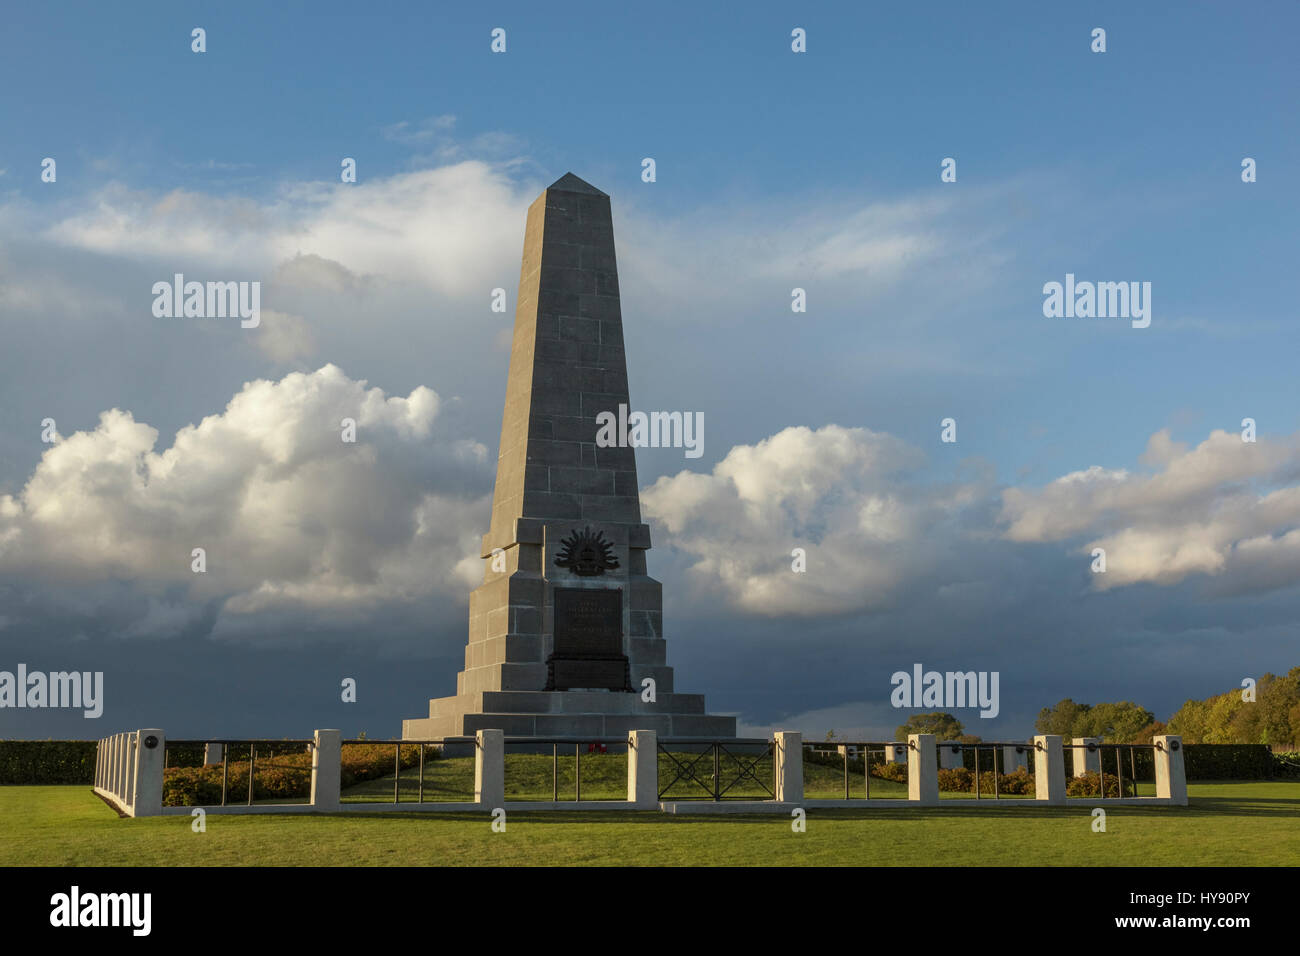 The First Australian Division Memorial – Pozières, France. The Australian Imperial Force had 7,700 casualties in a 4 day period at this location. Stock Photo